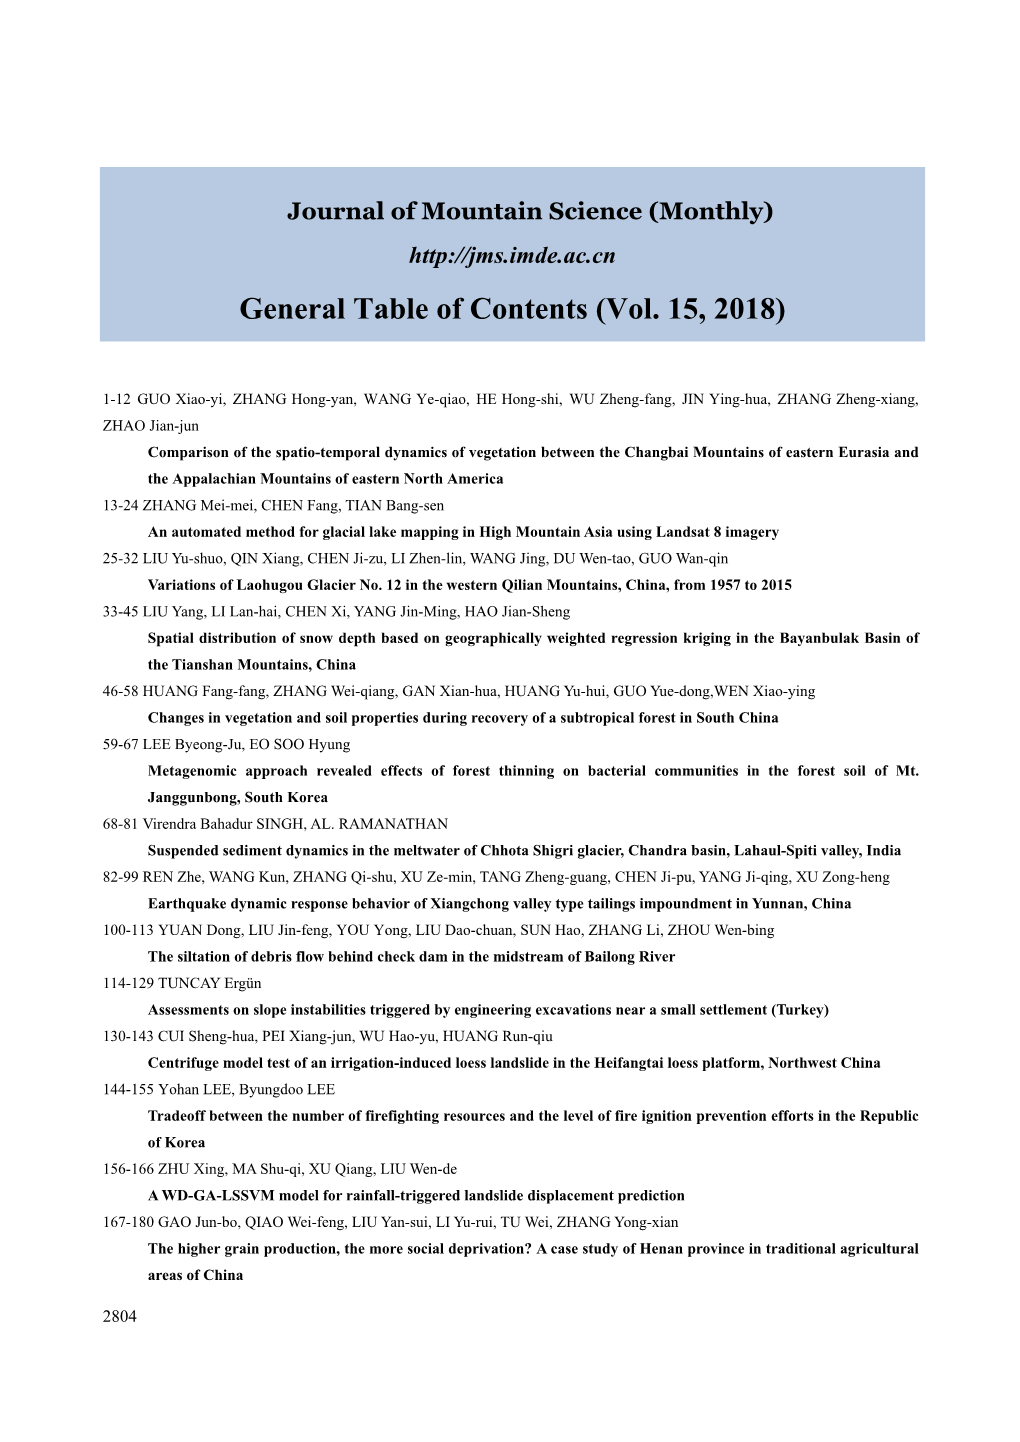 General Table of Contents (Vol. 15, 2018)